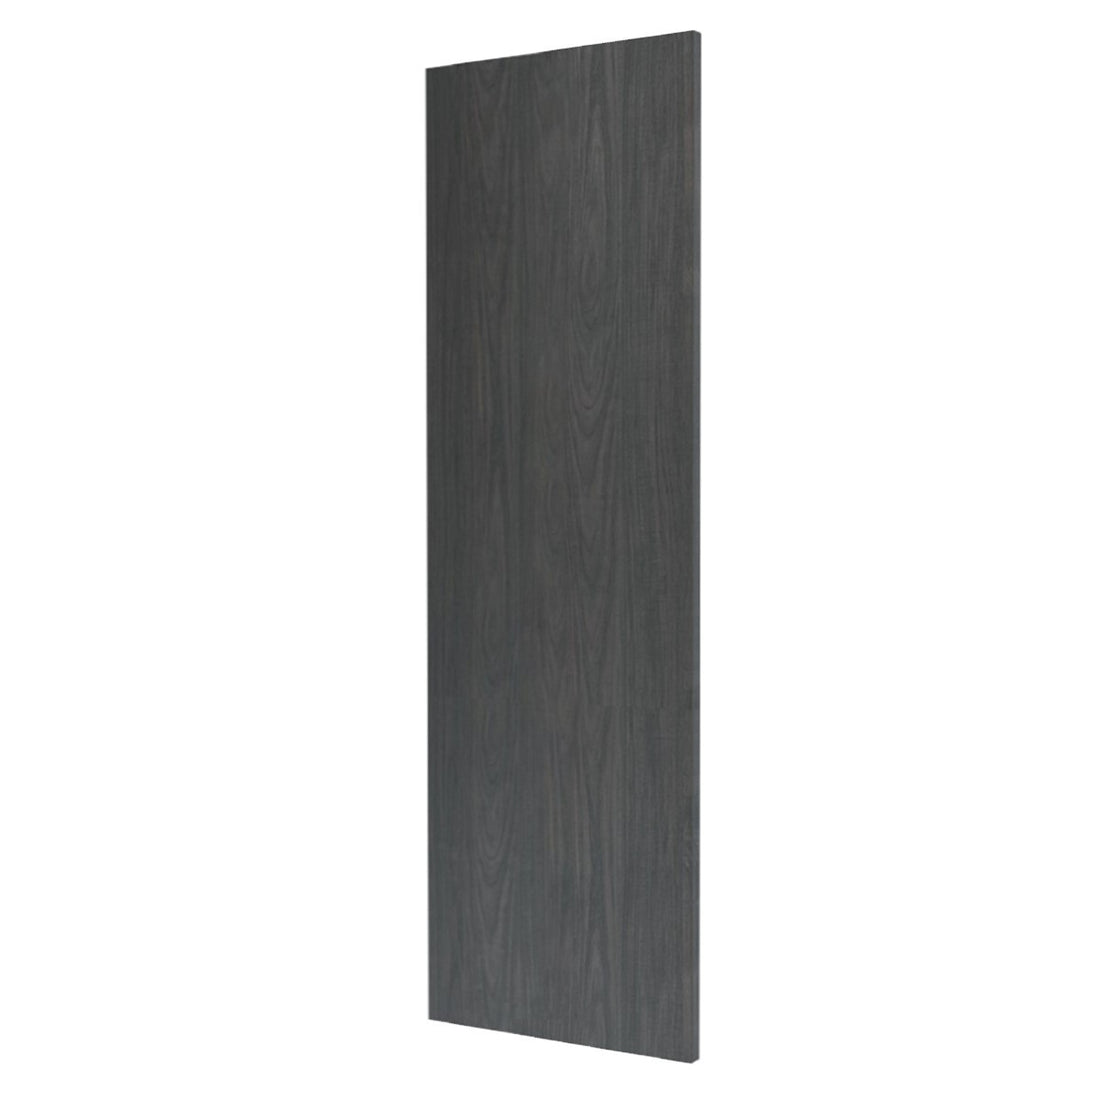 Carbon Marine Slab Style Pantry Kitchen Cabinet End Panel (24 in W x 0.75 in D x 90 in H) -  Pro-Edge HD